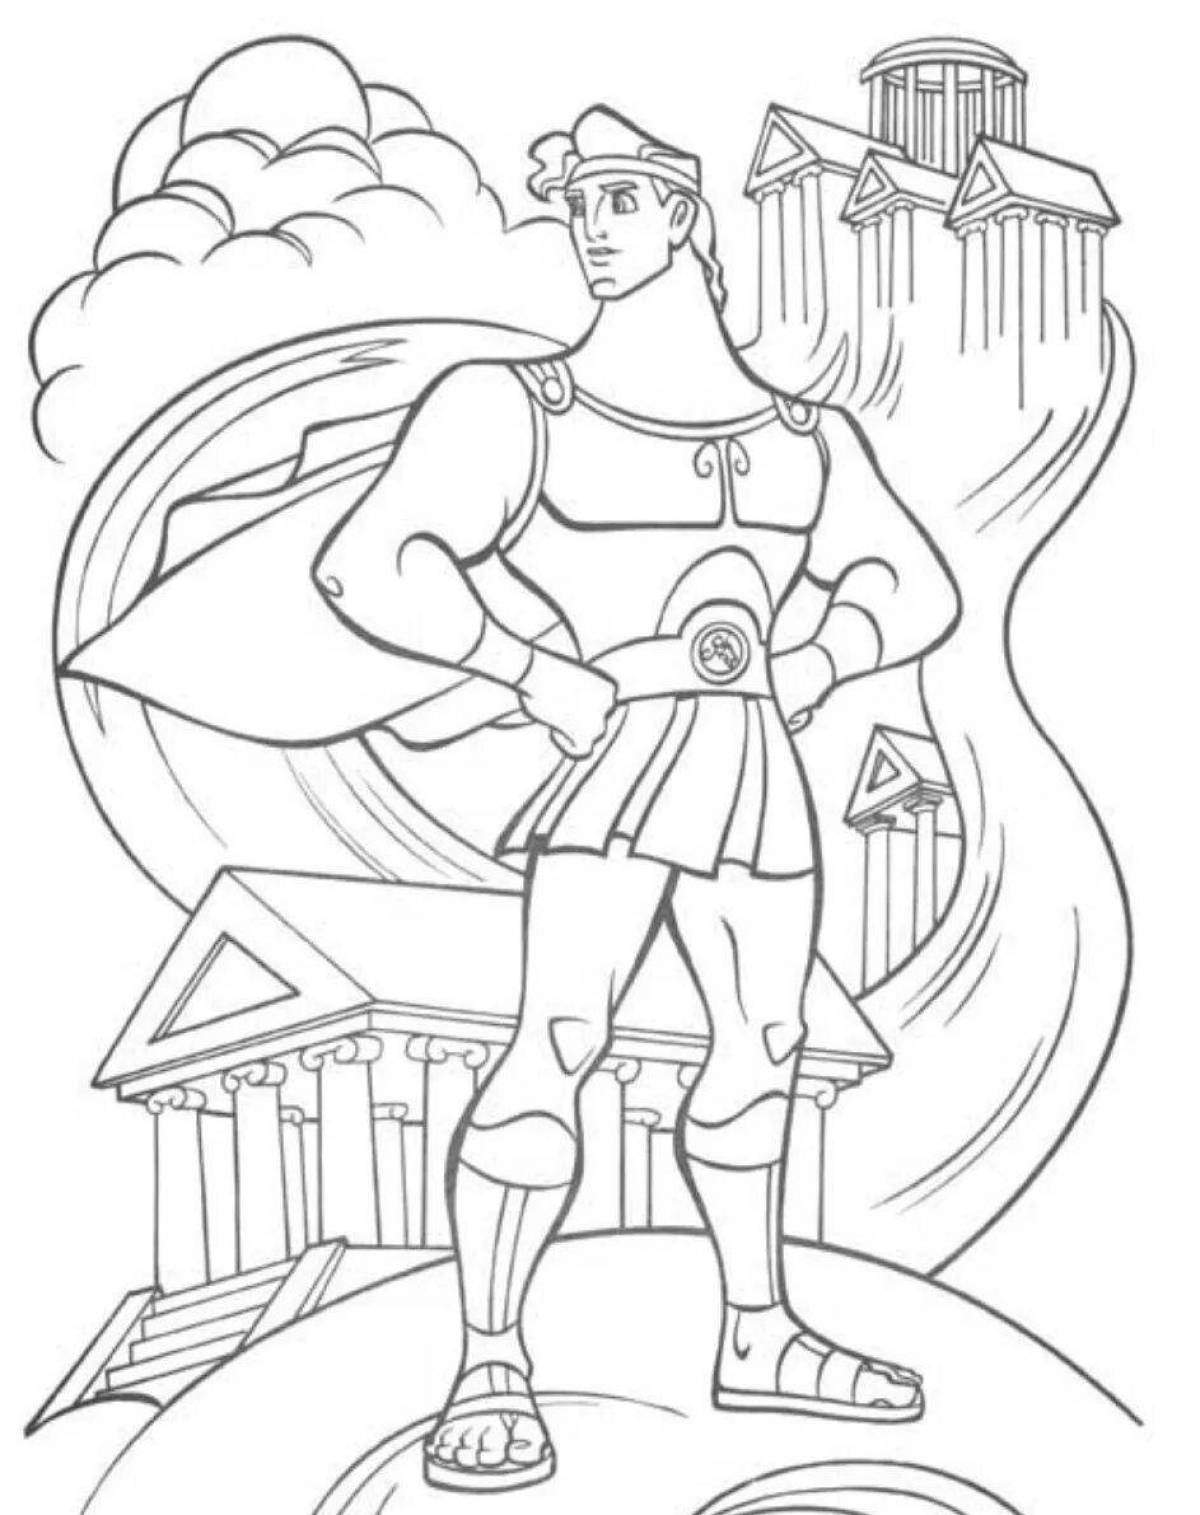 A fun coloring book from ancient Greek myths